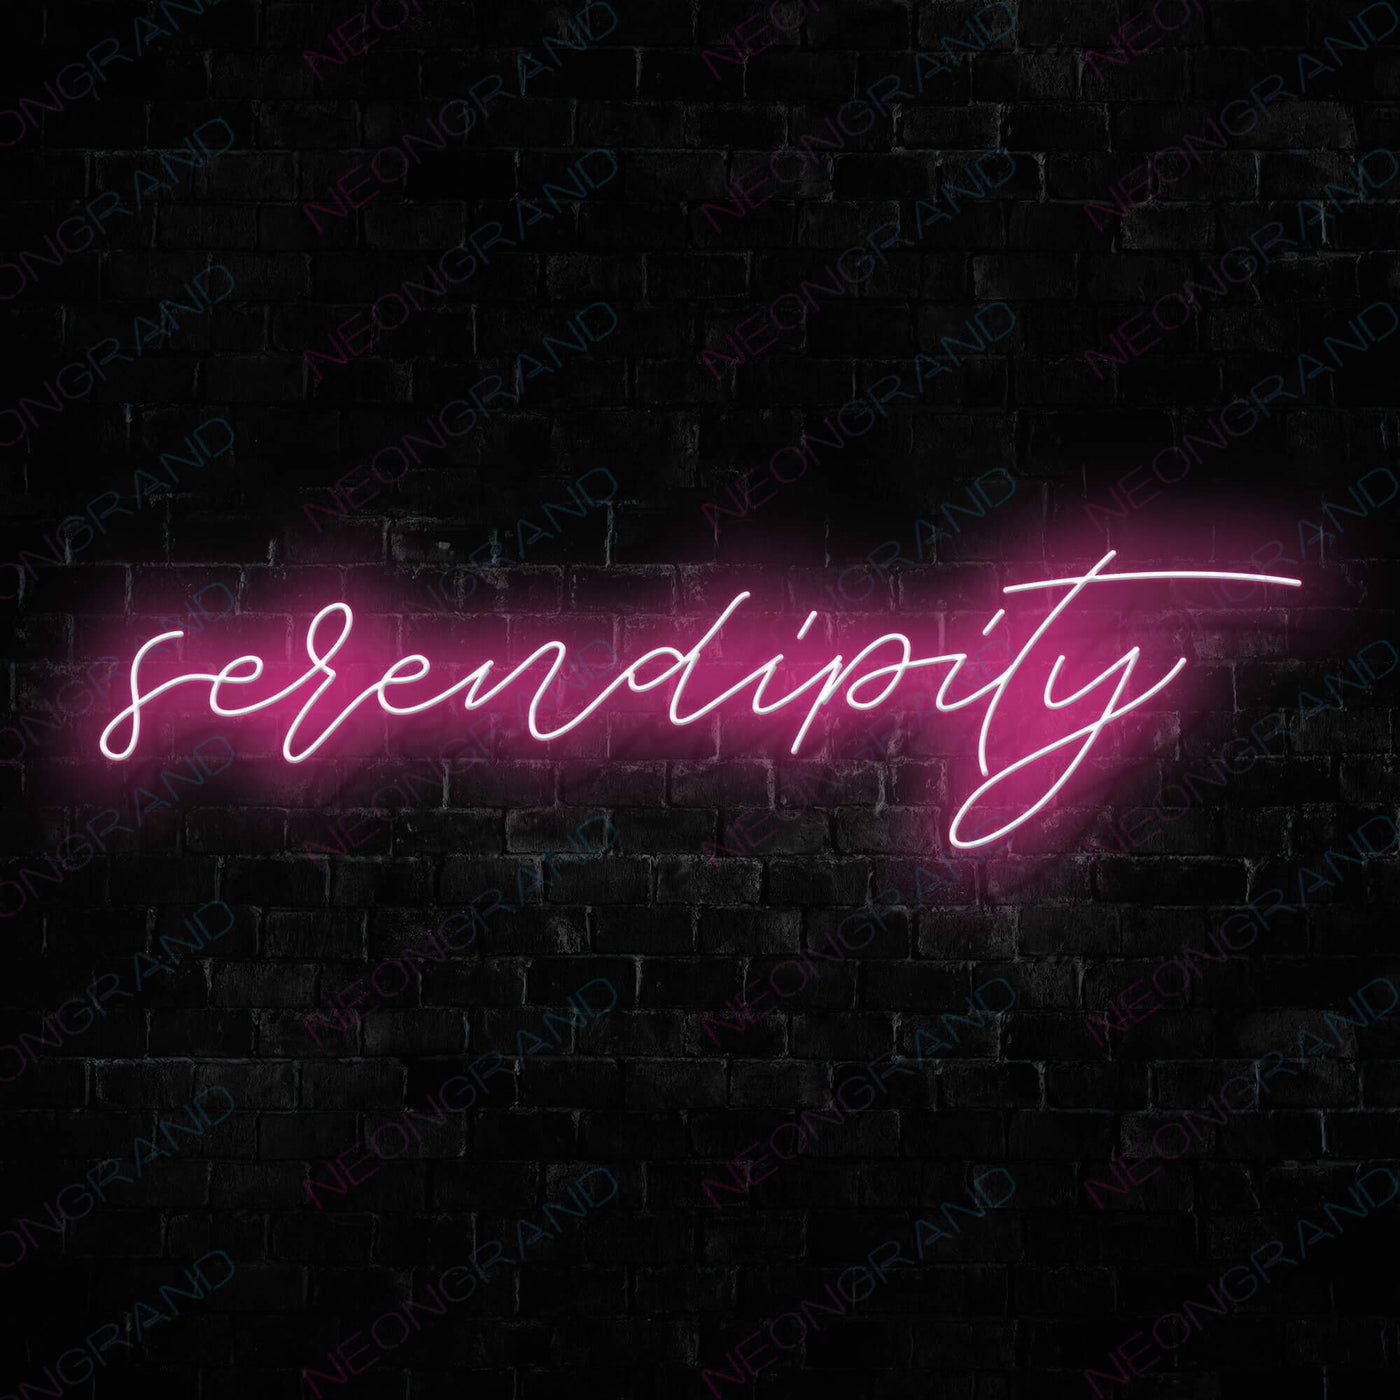 Serendipity BTS Neon Sign Army KPop Led Light Pink